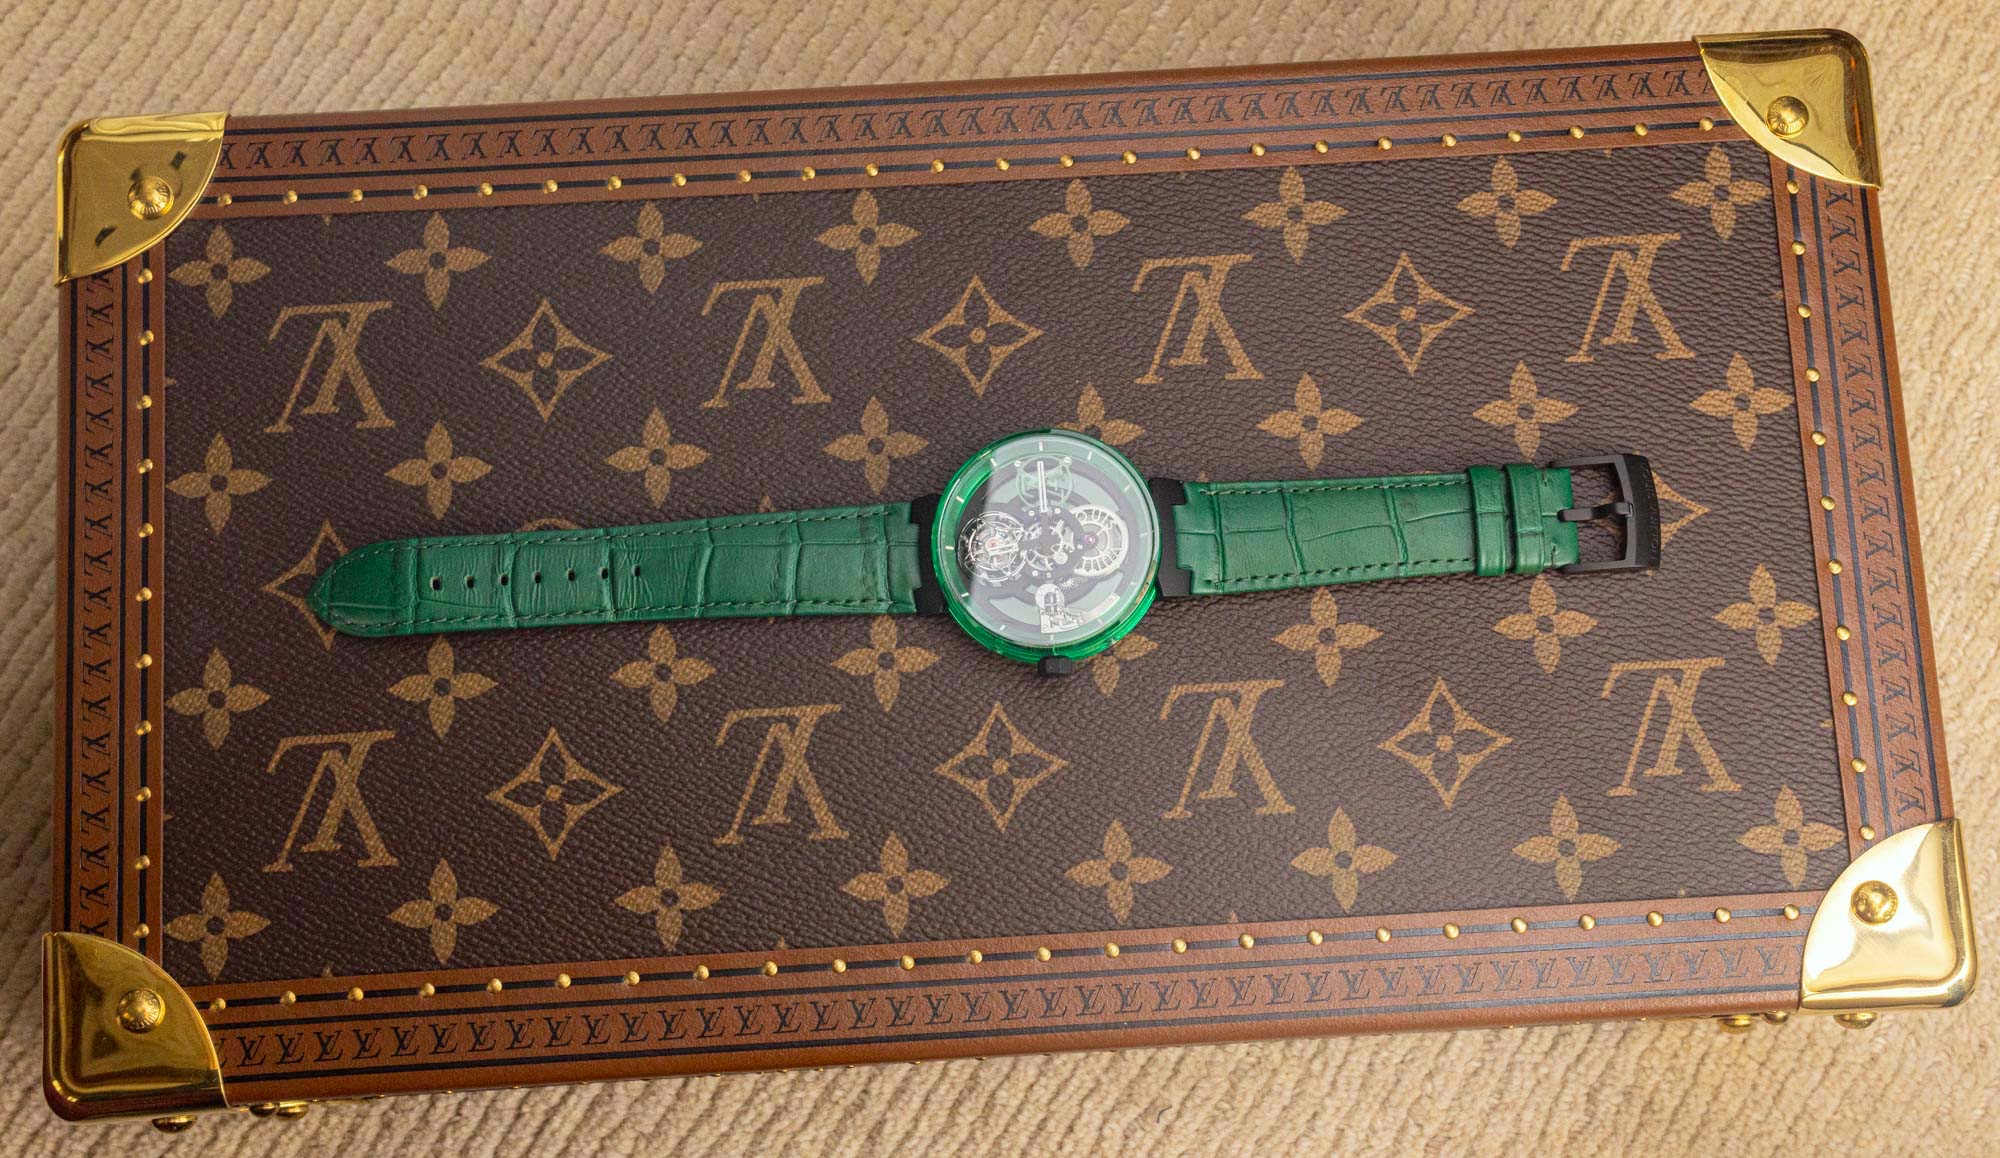 Introducing The Green & Yellow Sapphire Louis Vuitton Tambour Moon